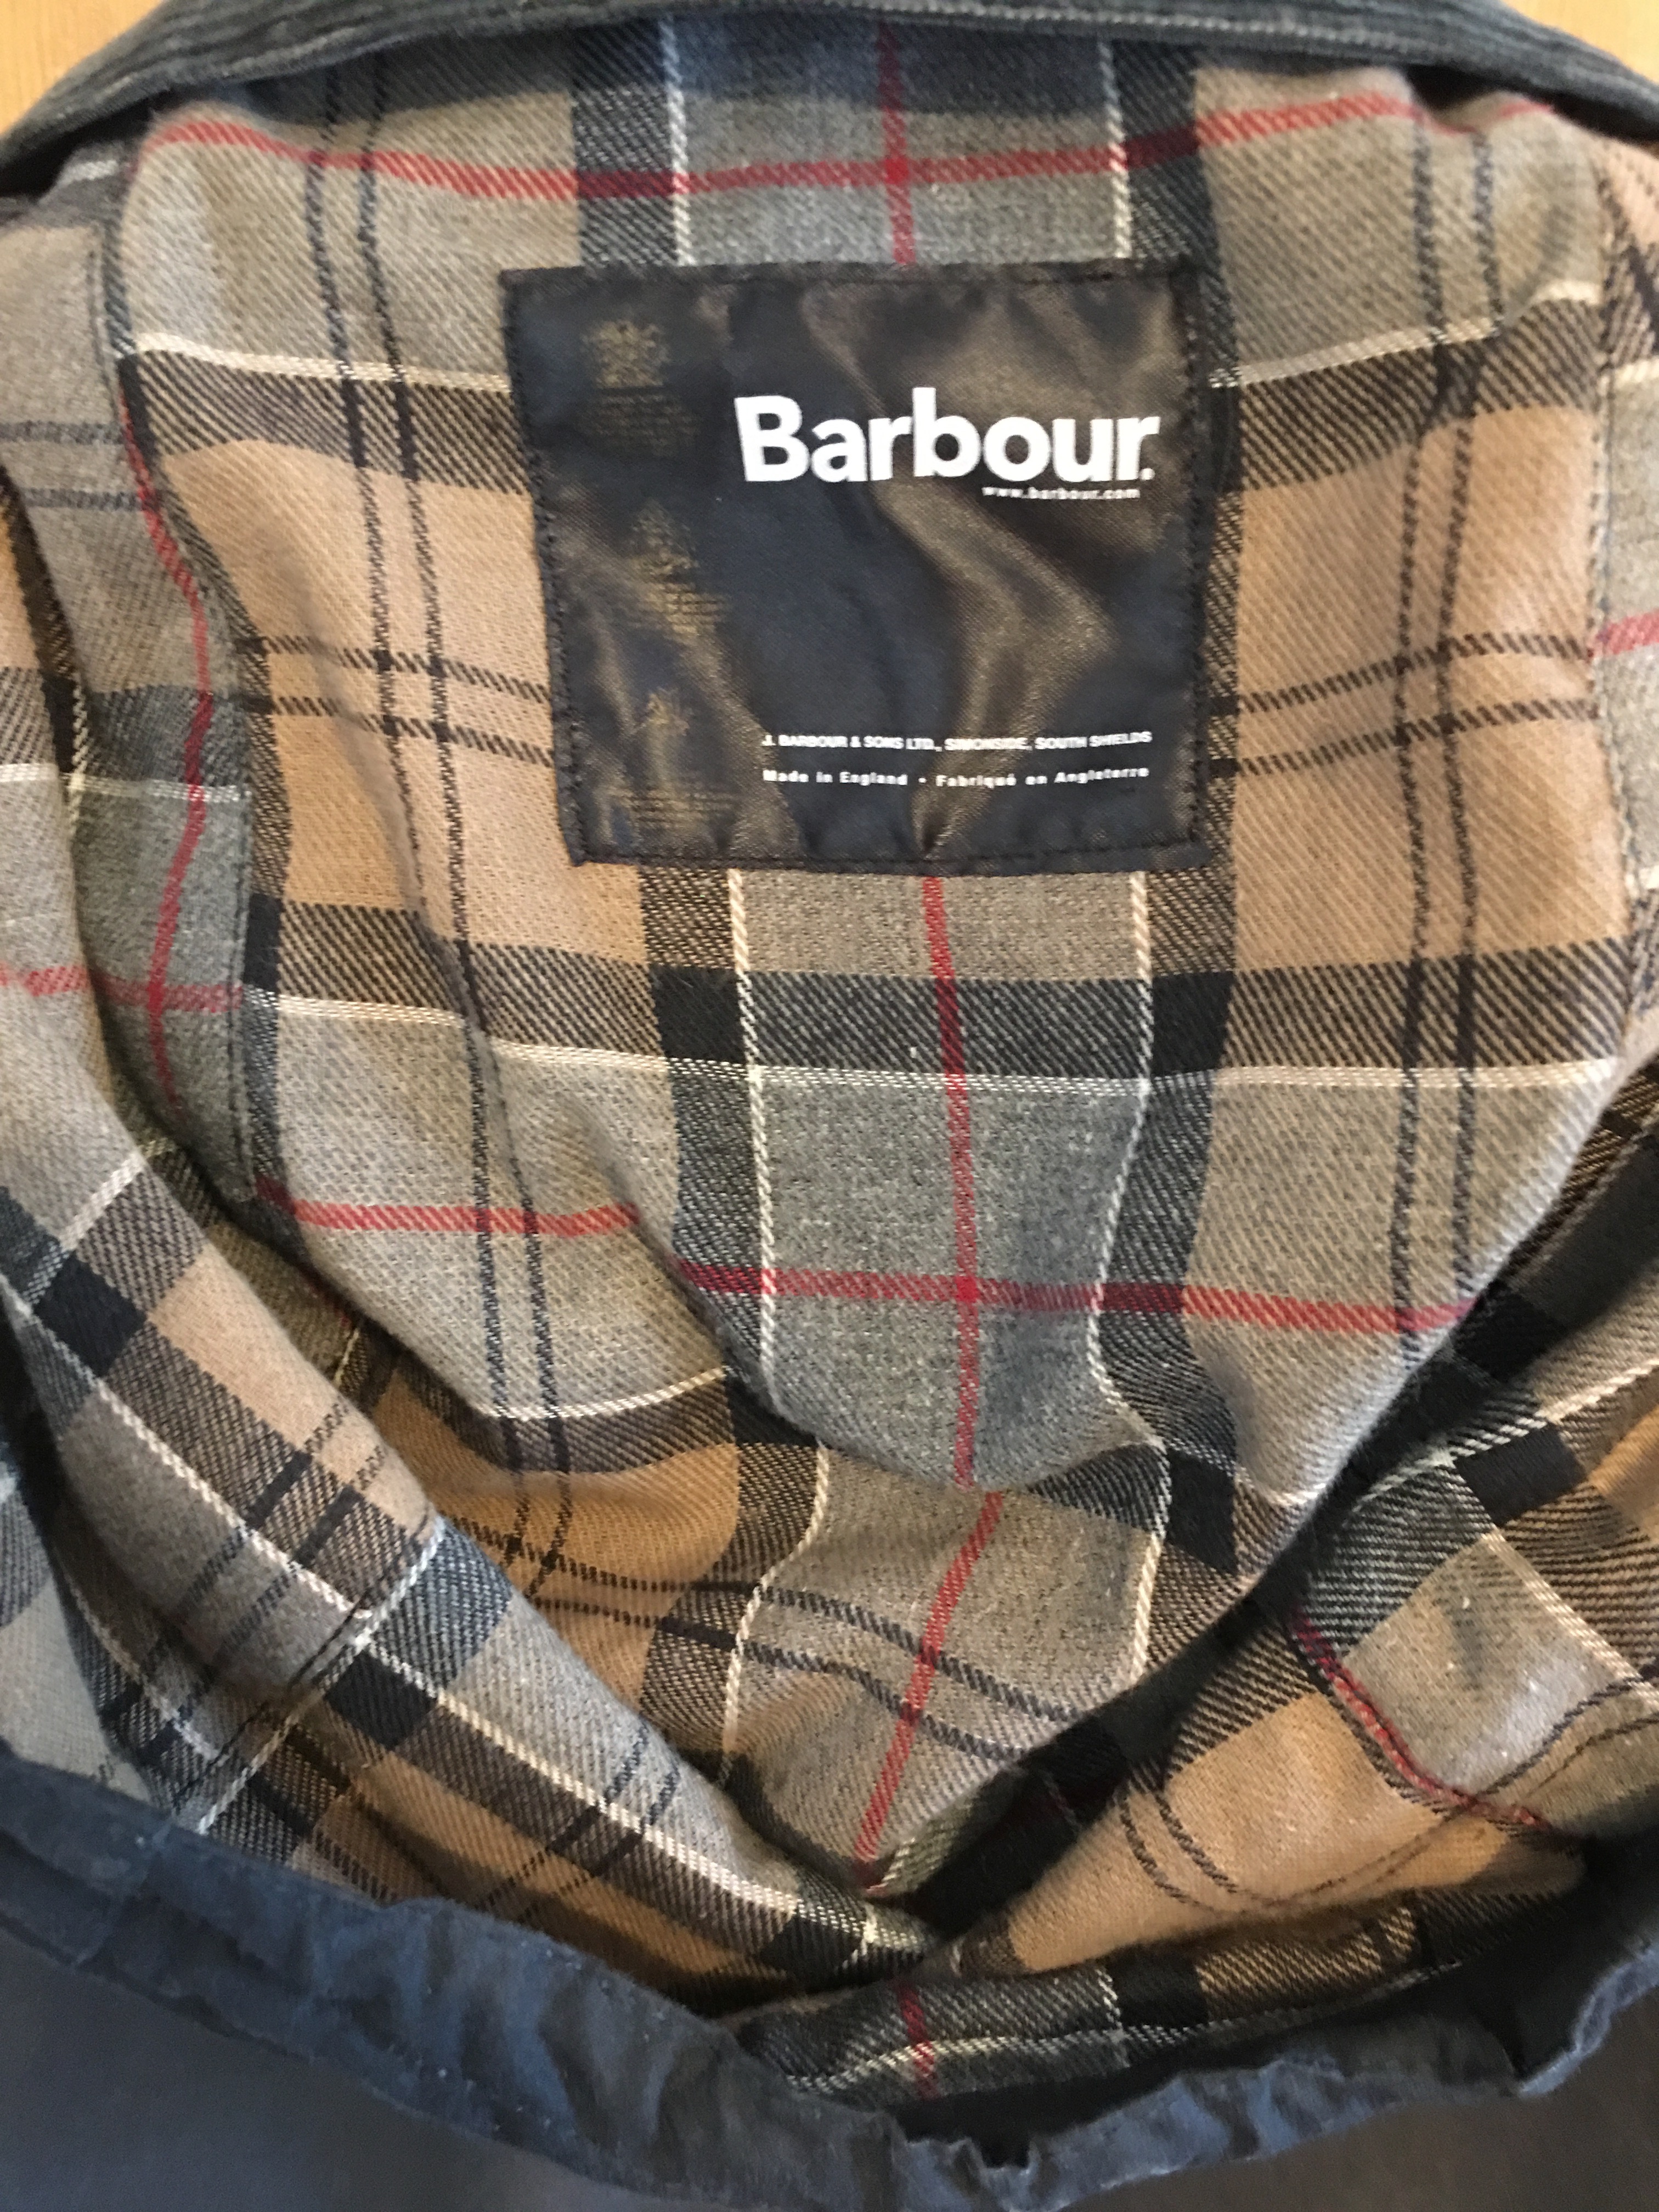 barbour jacket made in england